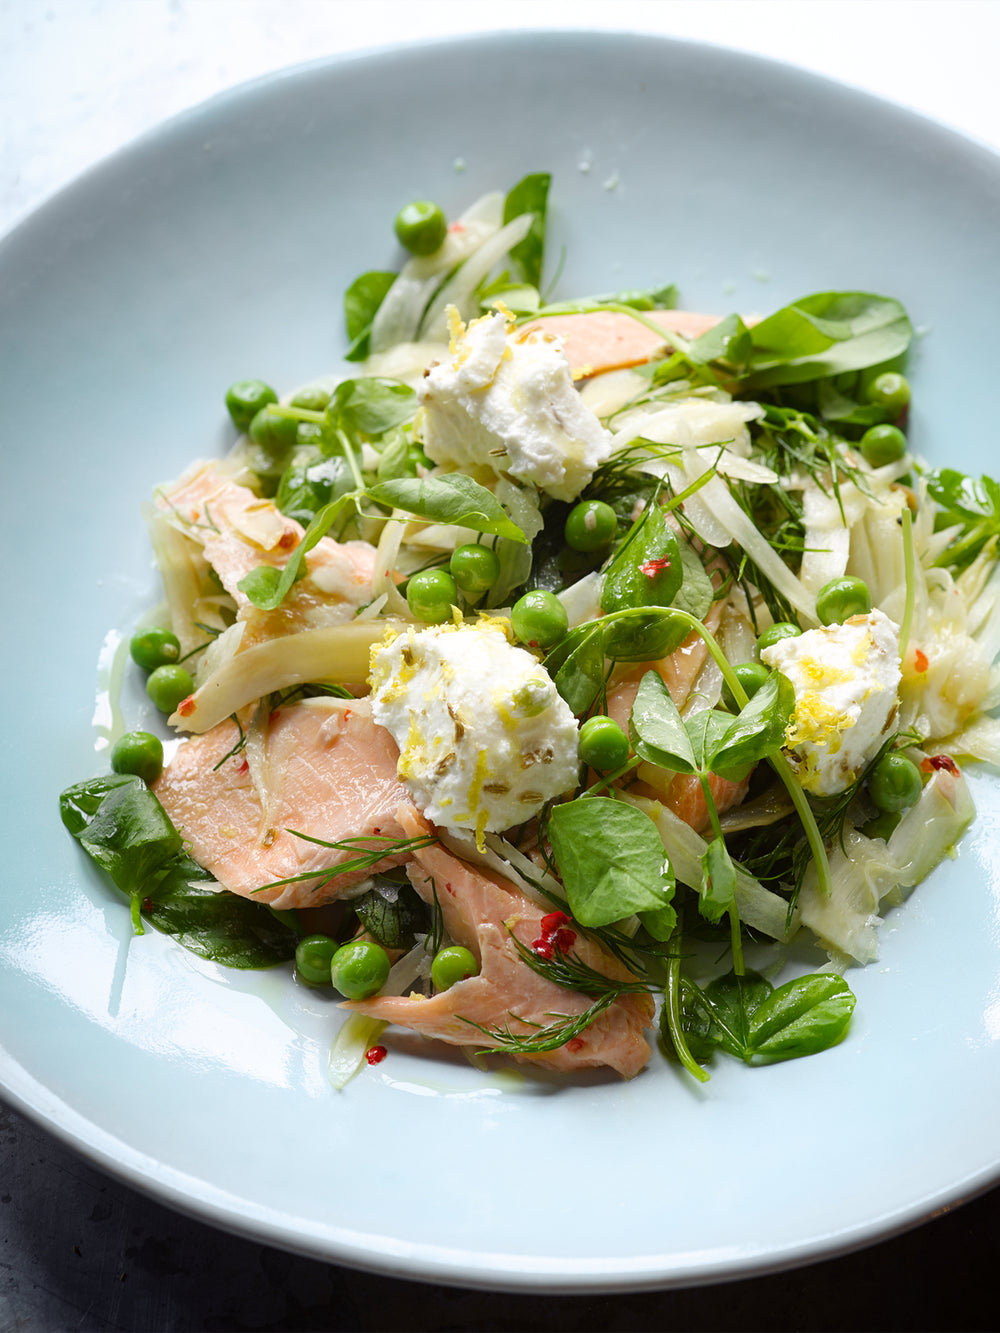 Hot smoked trout with fennel, peas and goat's cheese